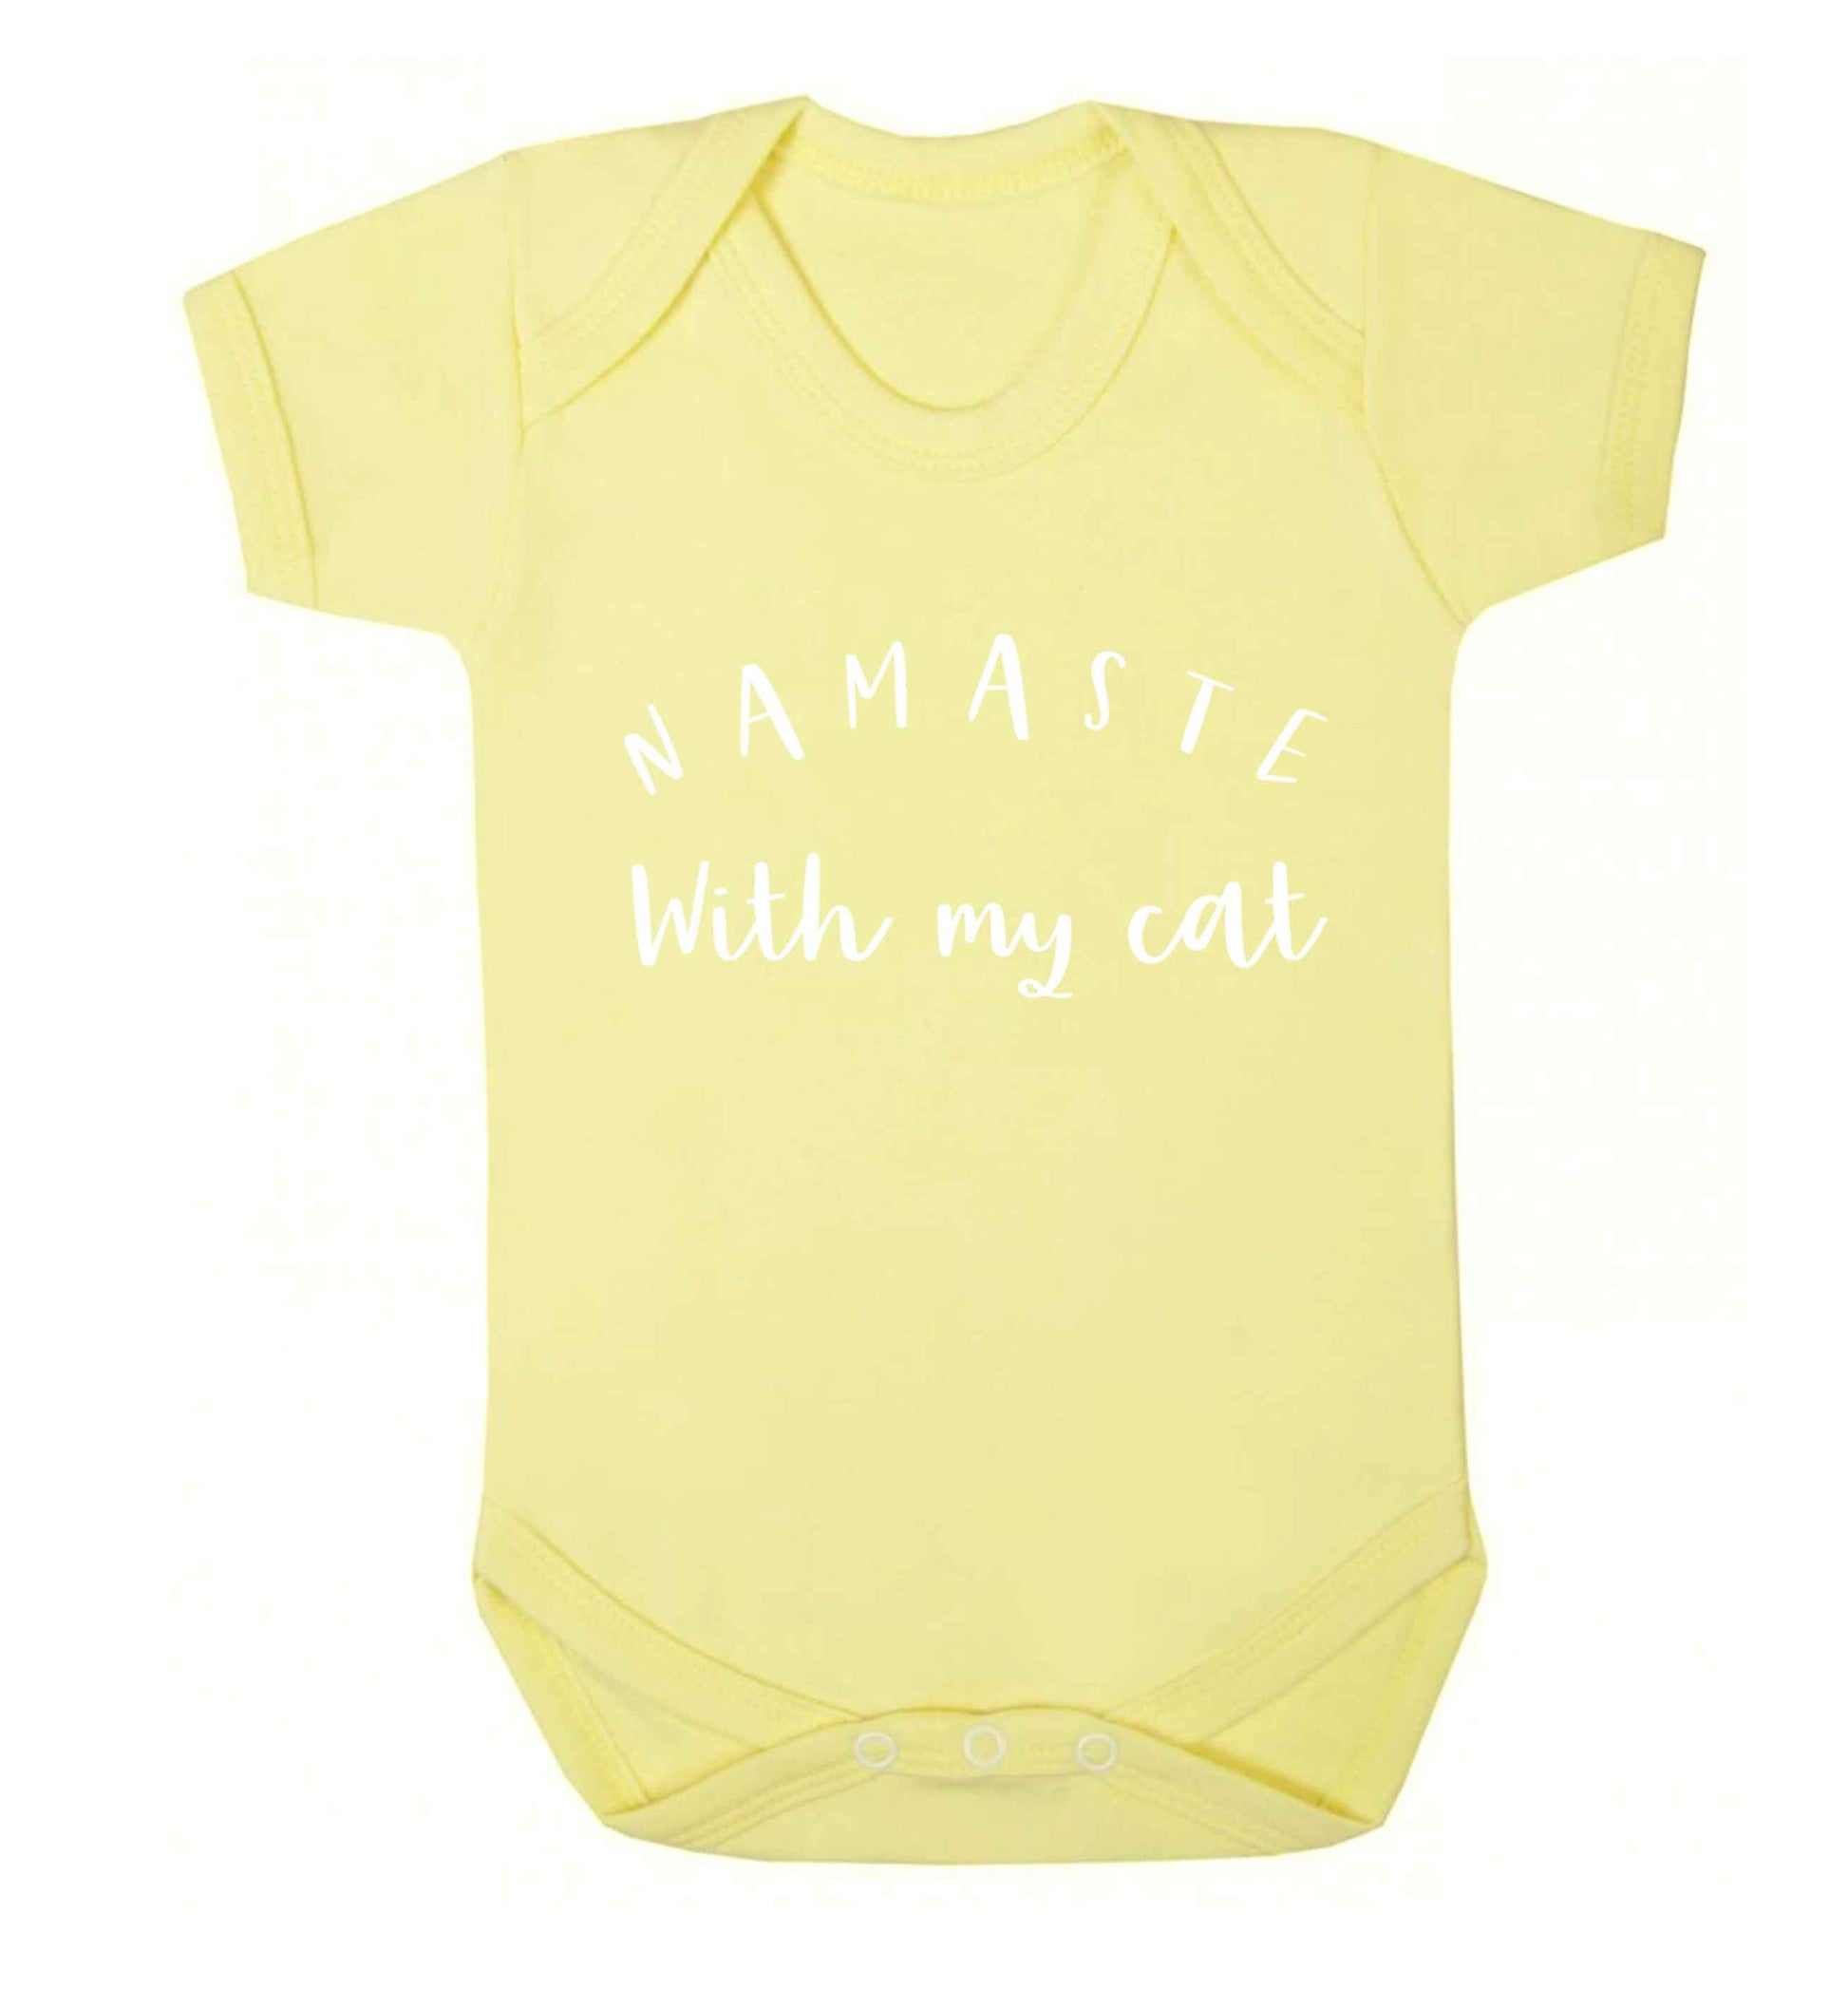 Namaste with my cat Baby Vest pale yellow 18-24 months